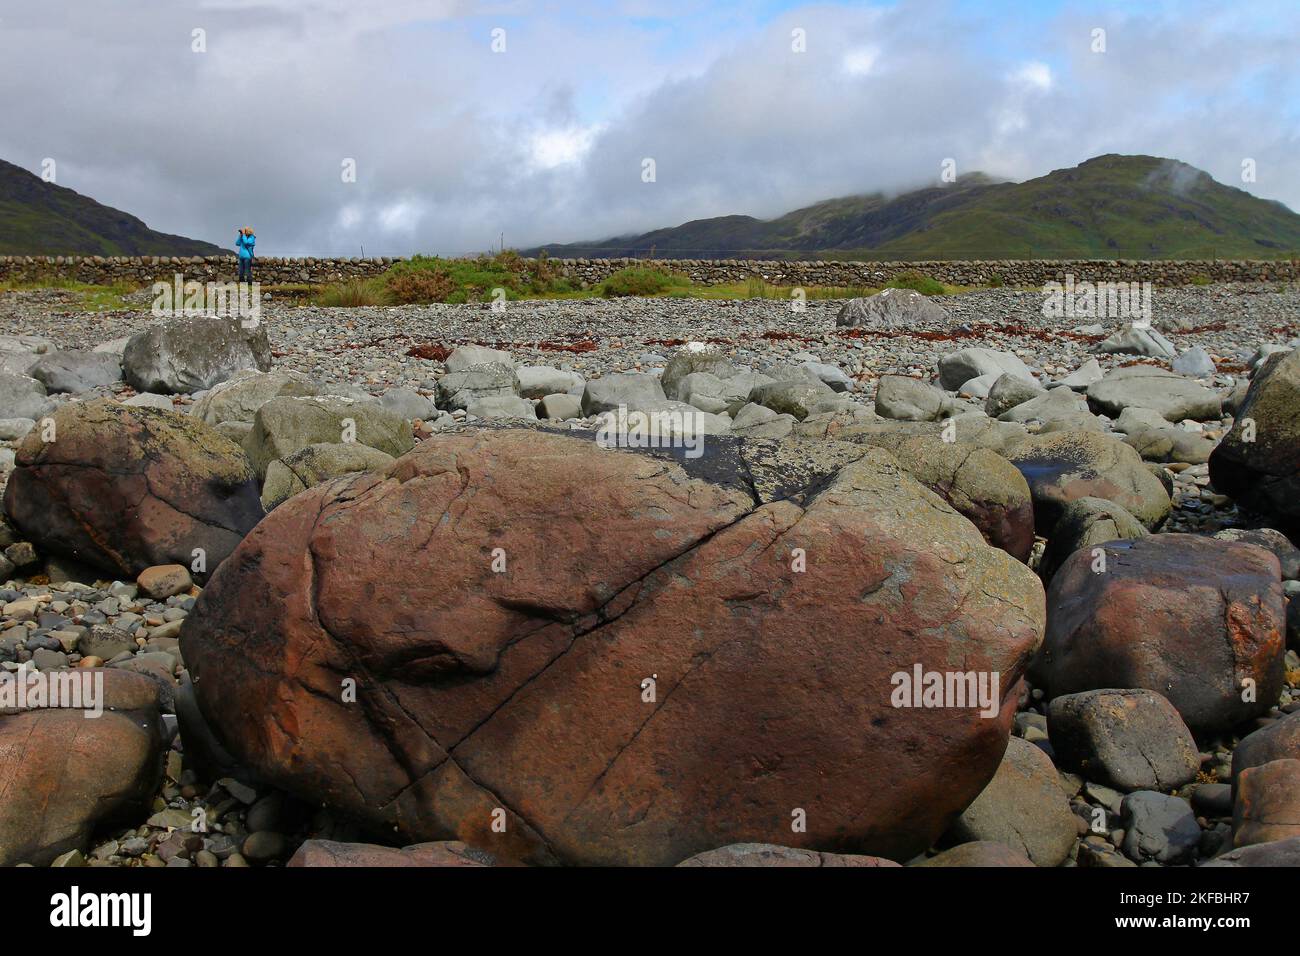 Big Red-Coloured Rocks and Stony Strand at Loch Buie, Lochbuie, Mull, Isle of Mull, Hebrides, Inner Hebrides, Inner Isles, Scotland, United Kingdom Stock Photo